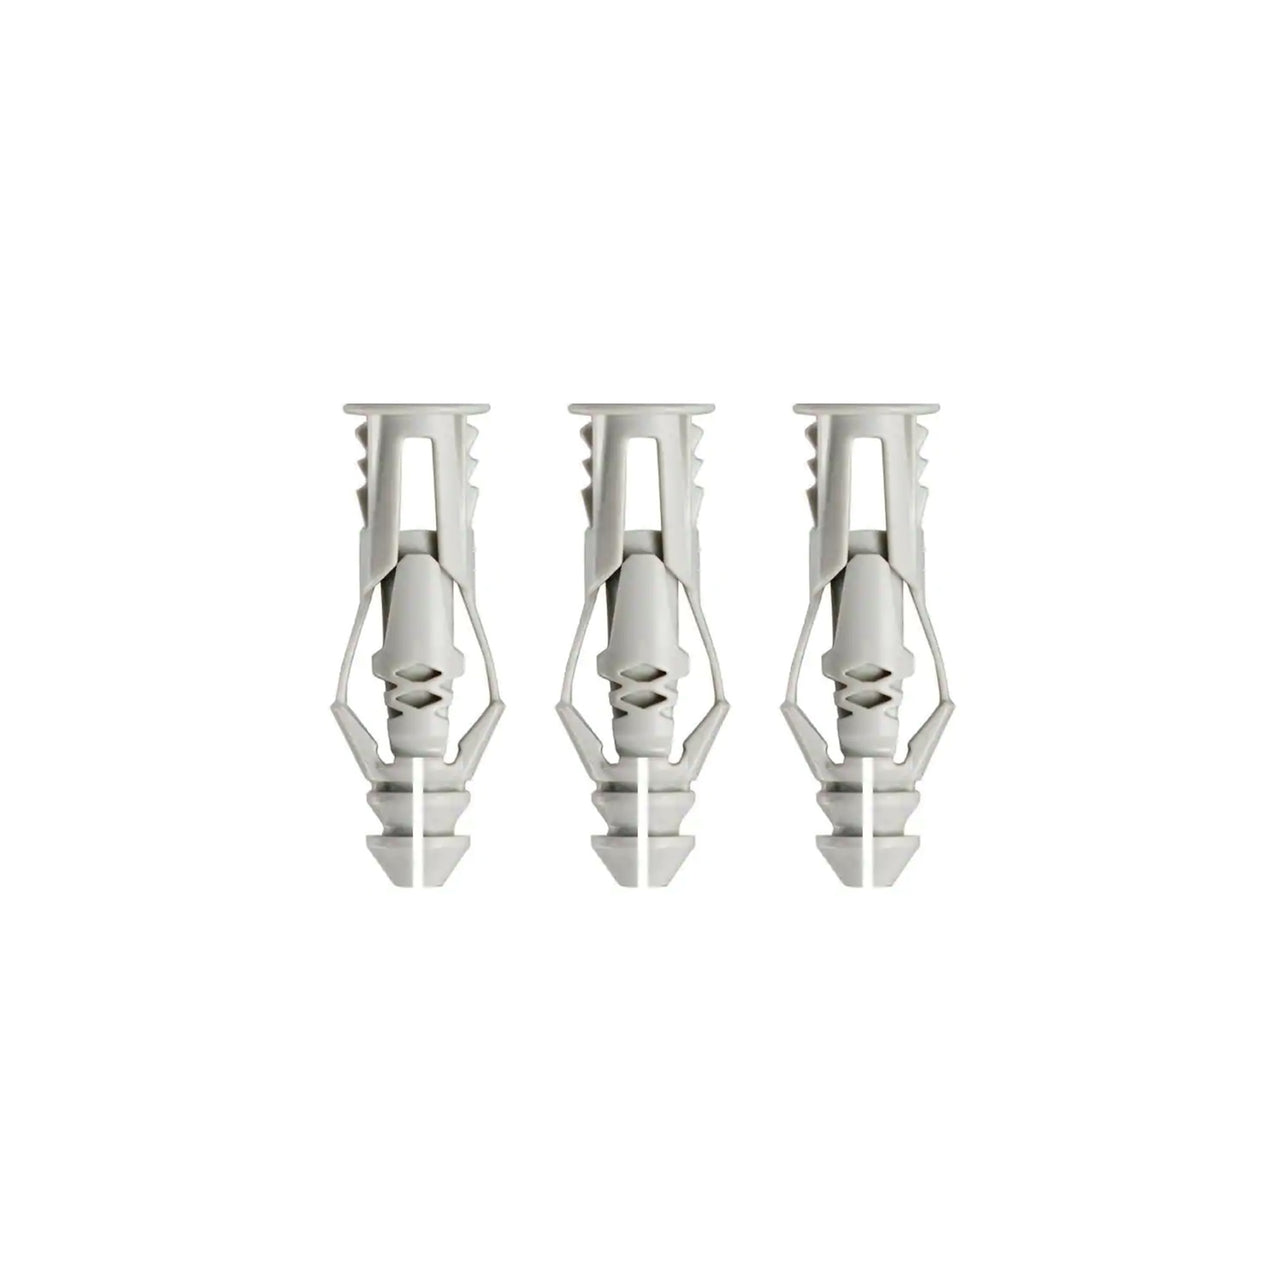 Hollow Wall Anchor (3 pack)